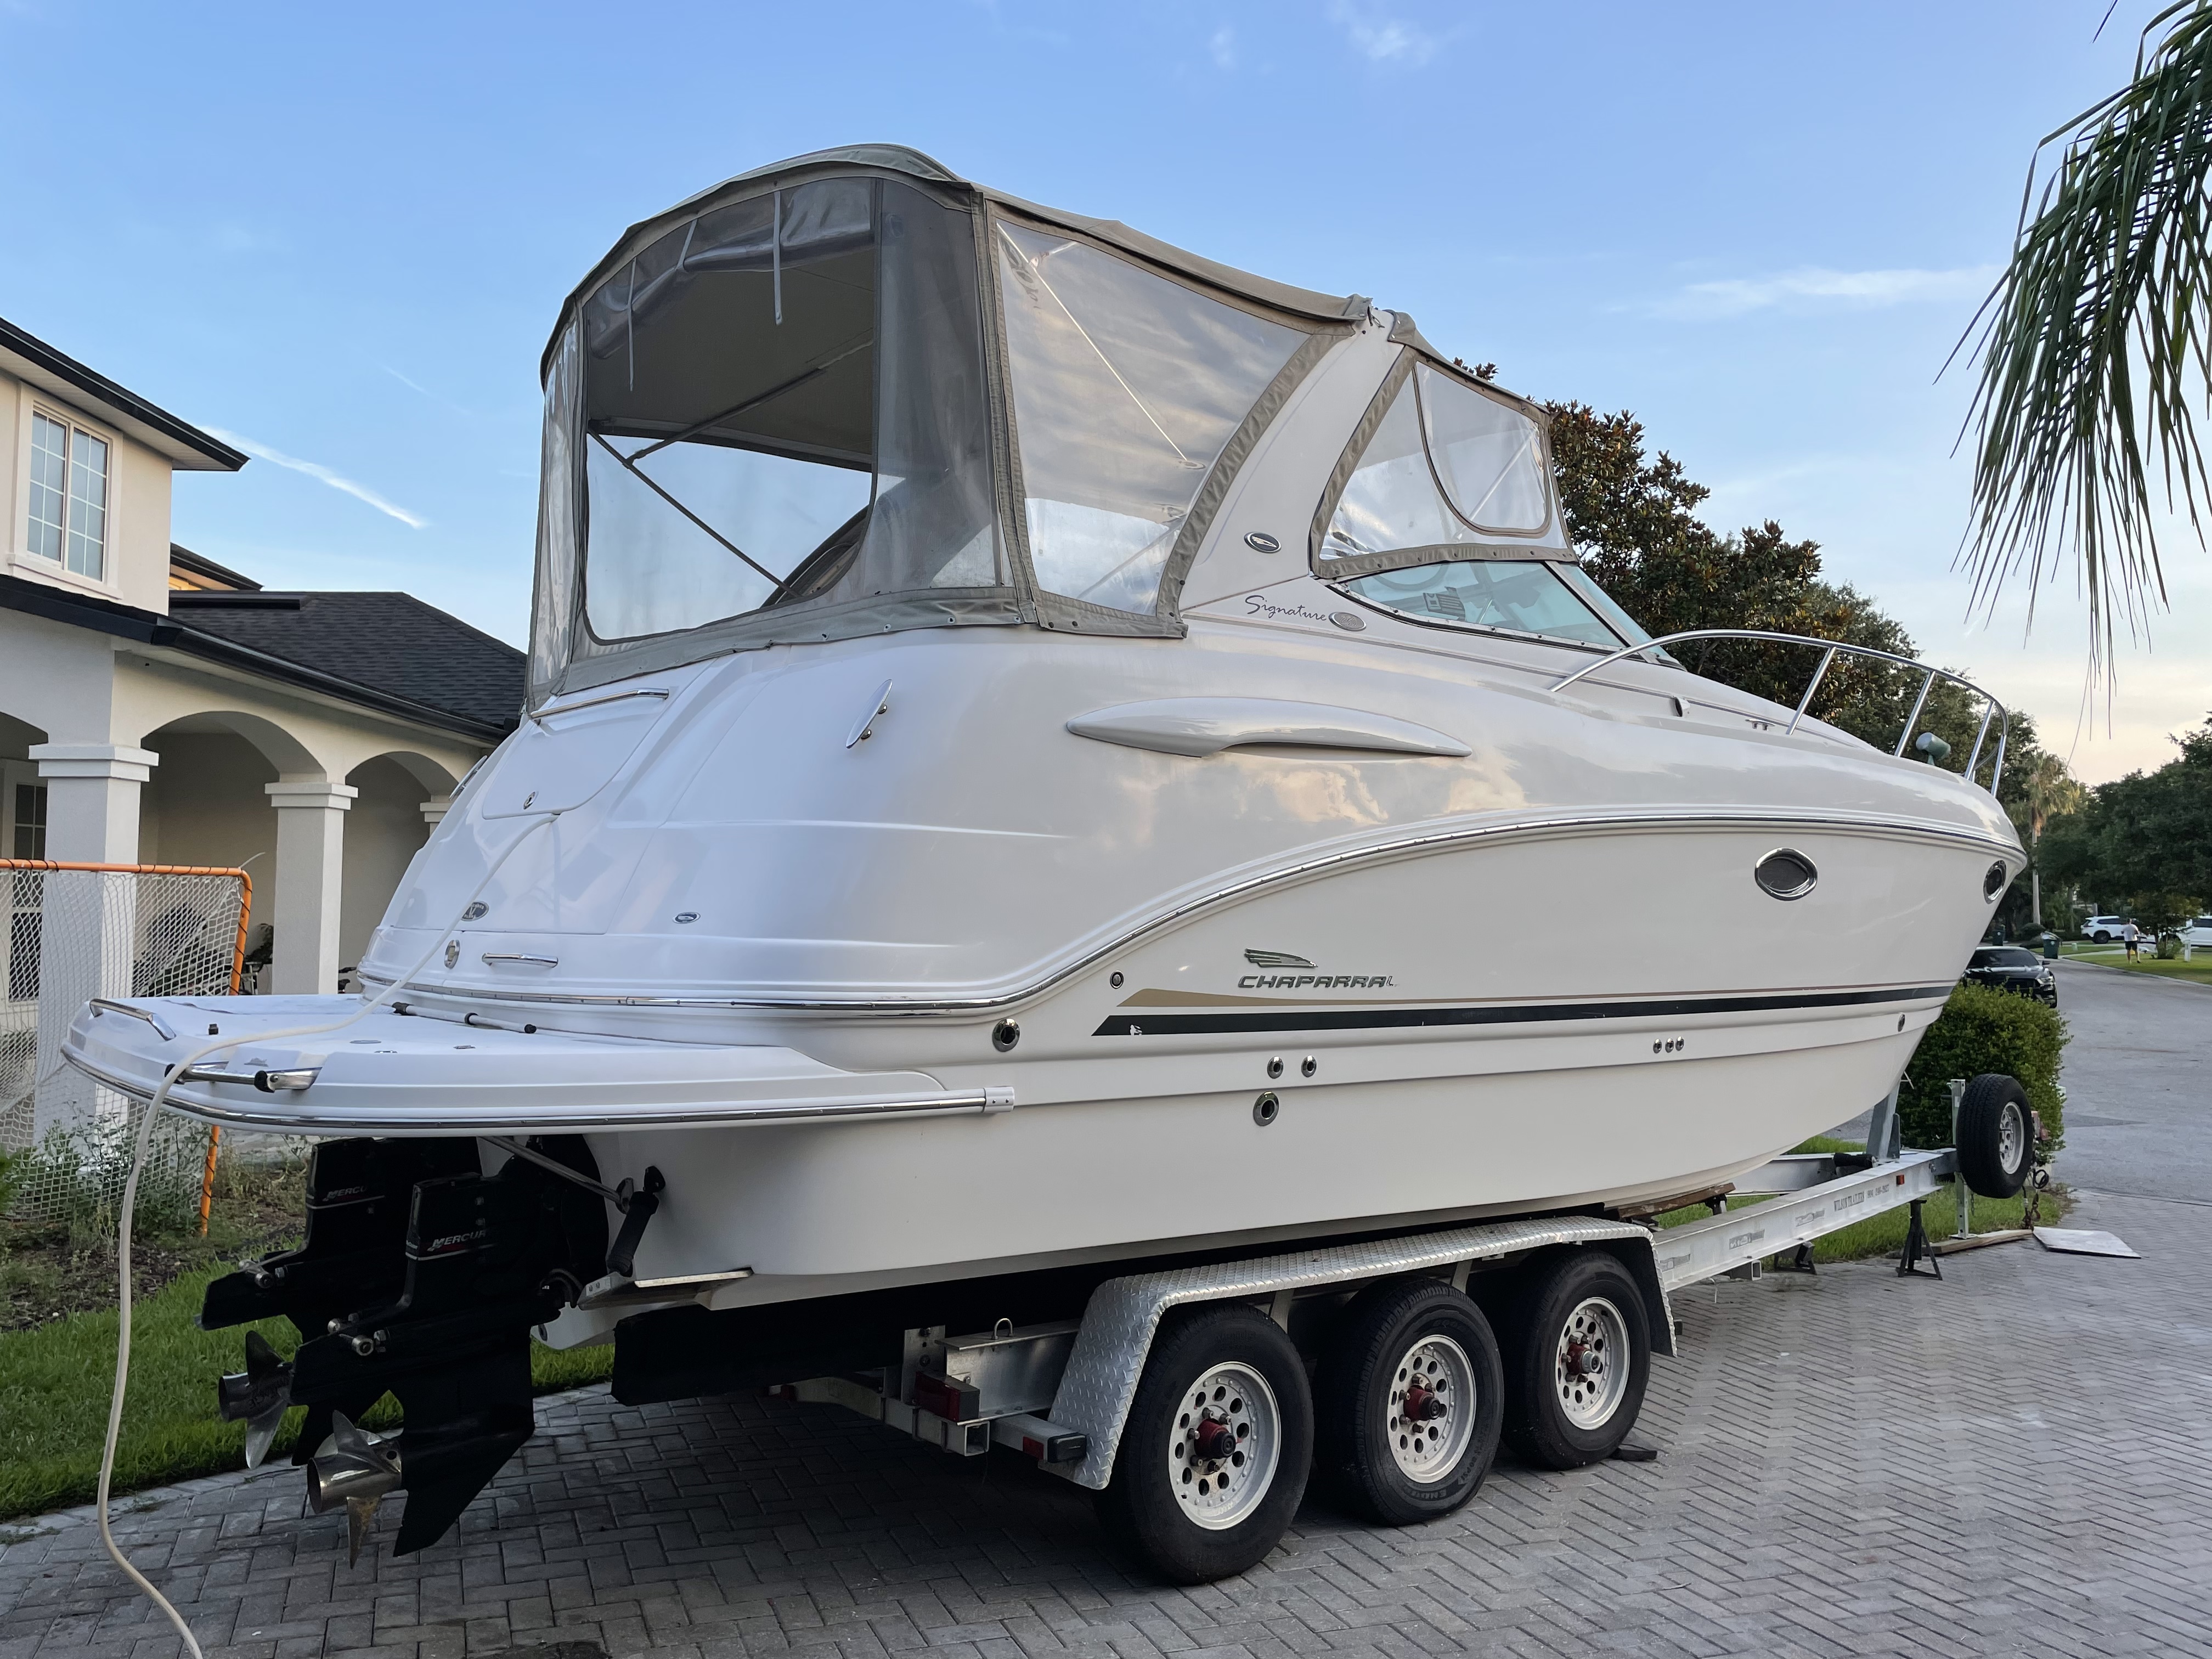 2003 Chaparral Signature 280 Power boat for sale in Jacksonville, FL - image 1 